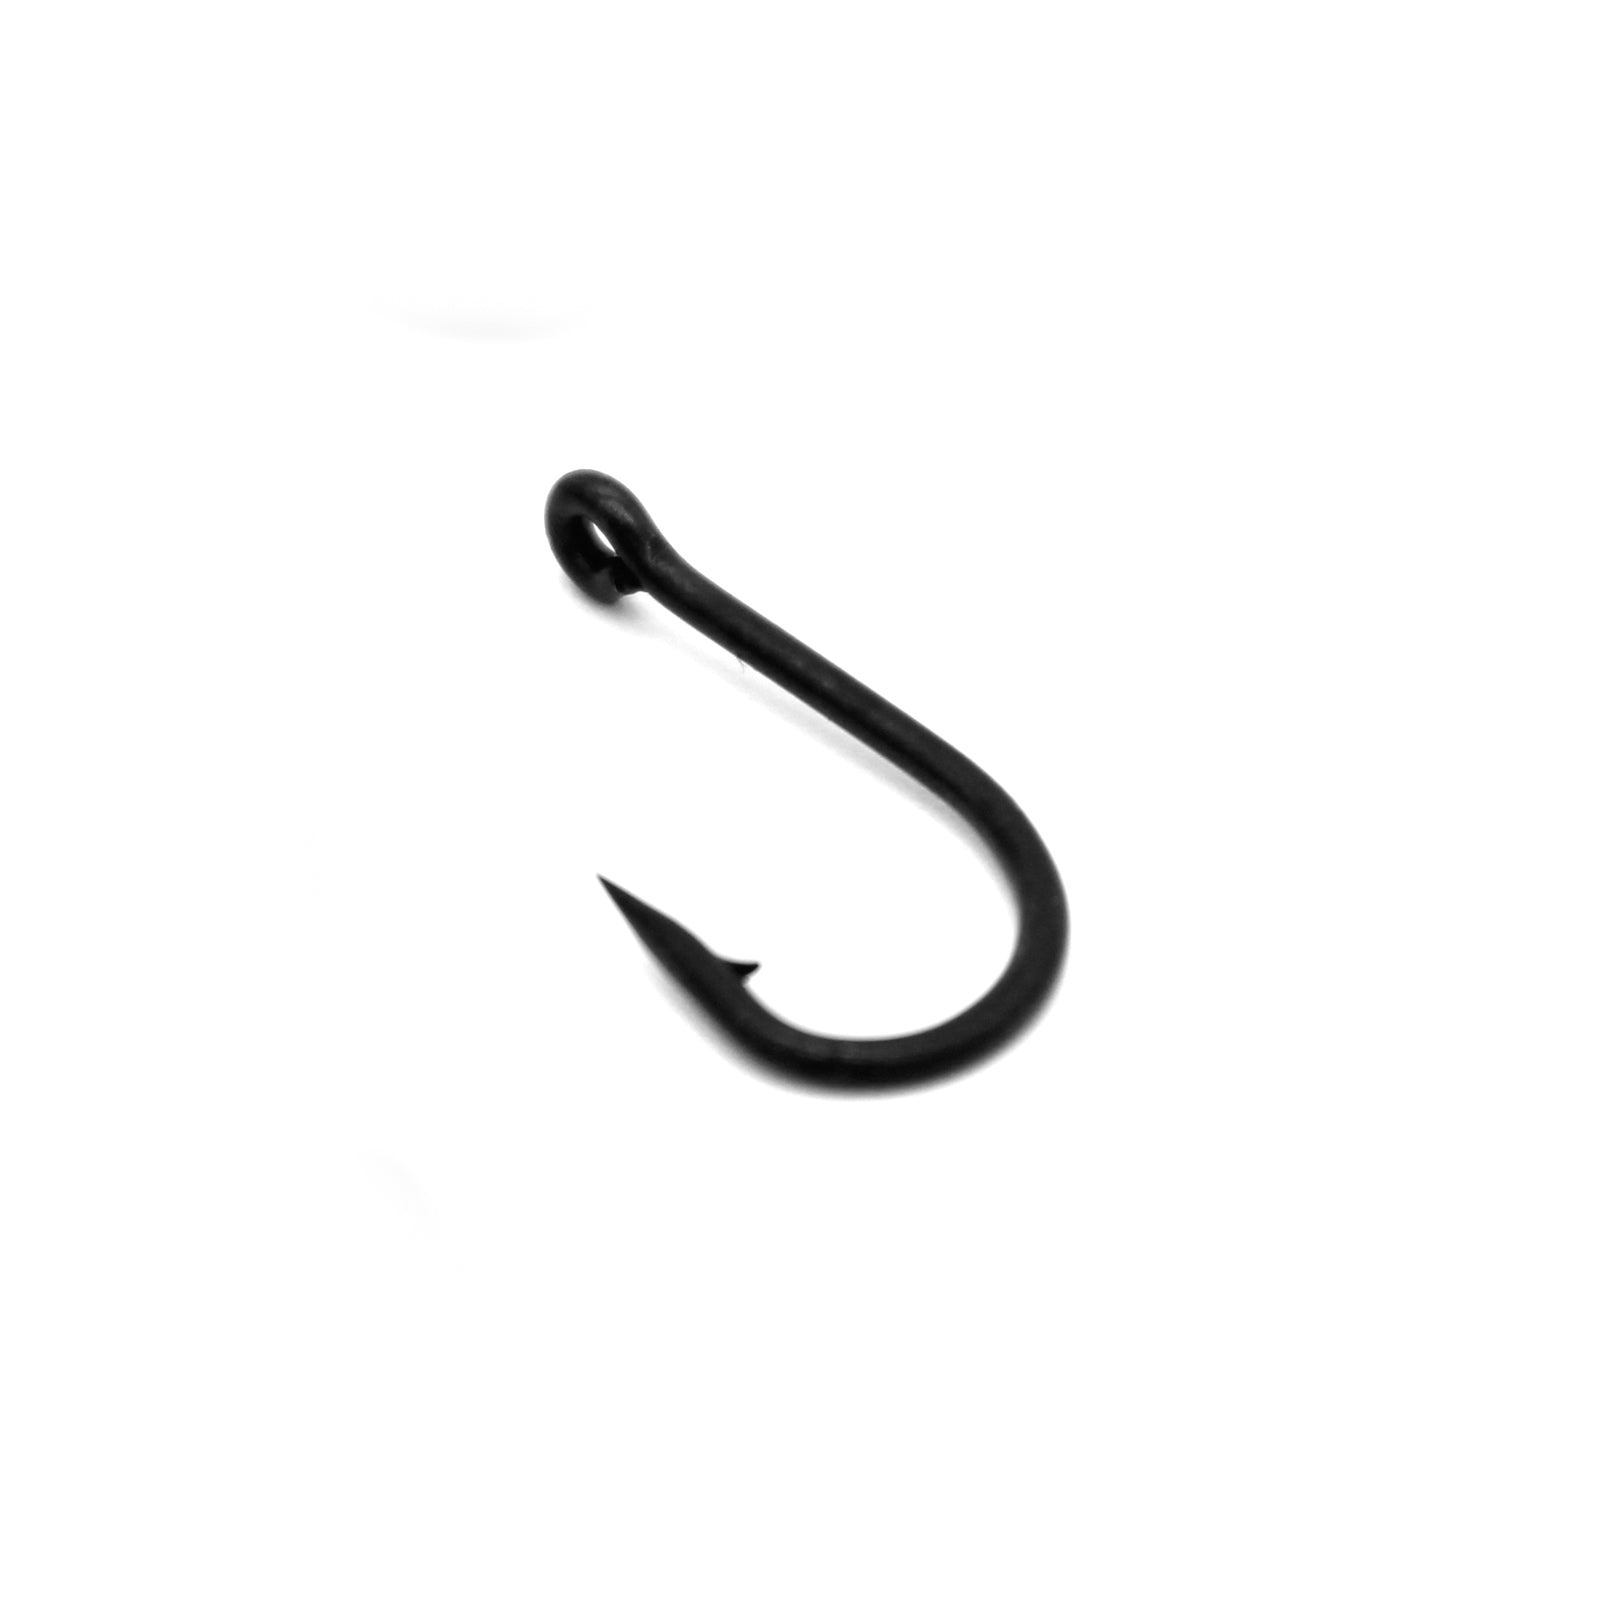 Deception Angling X-Snag Micro Barbed Fishing Hook